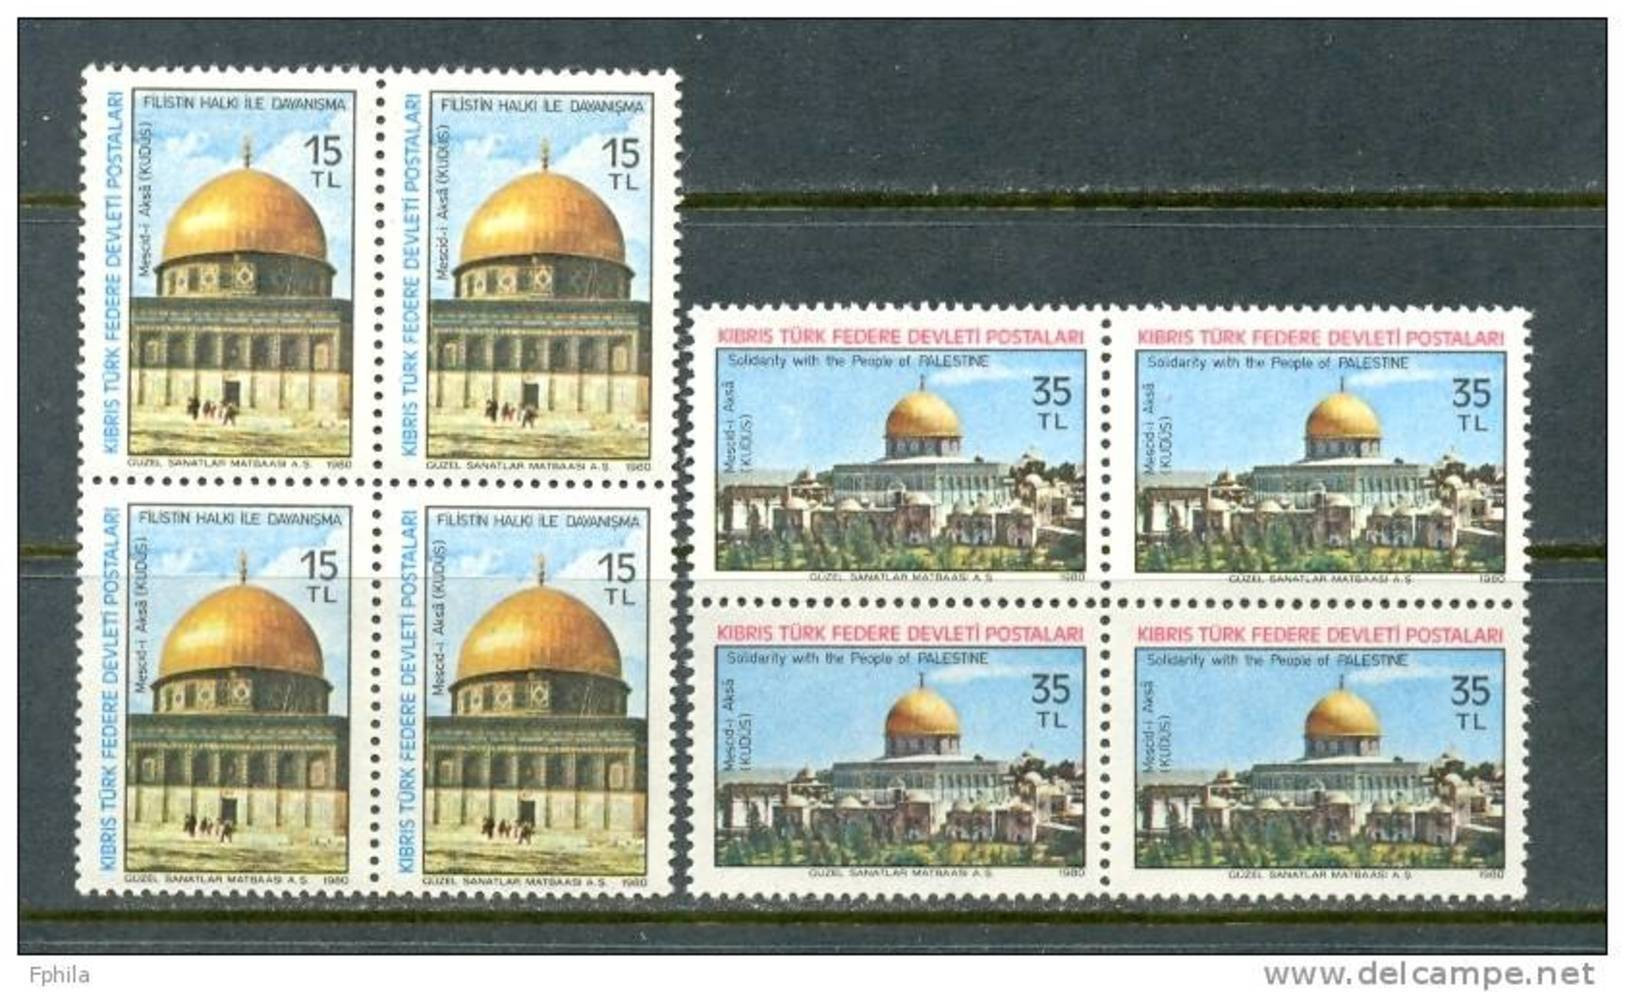 1980 NORTH CYPRUS SOLIDARITY WITH THE PEOPLE OF PALESTINE BLOCK OF 4 MNH ** - Ungebraucht